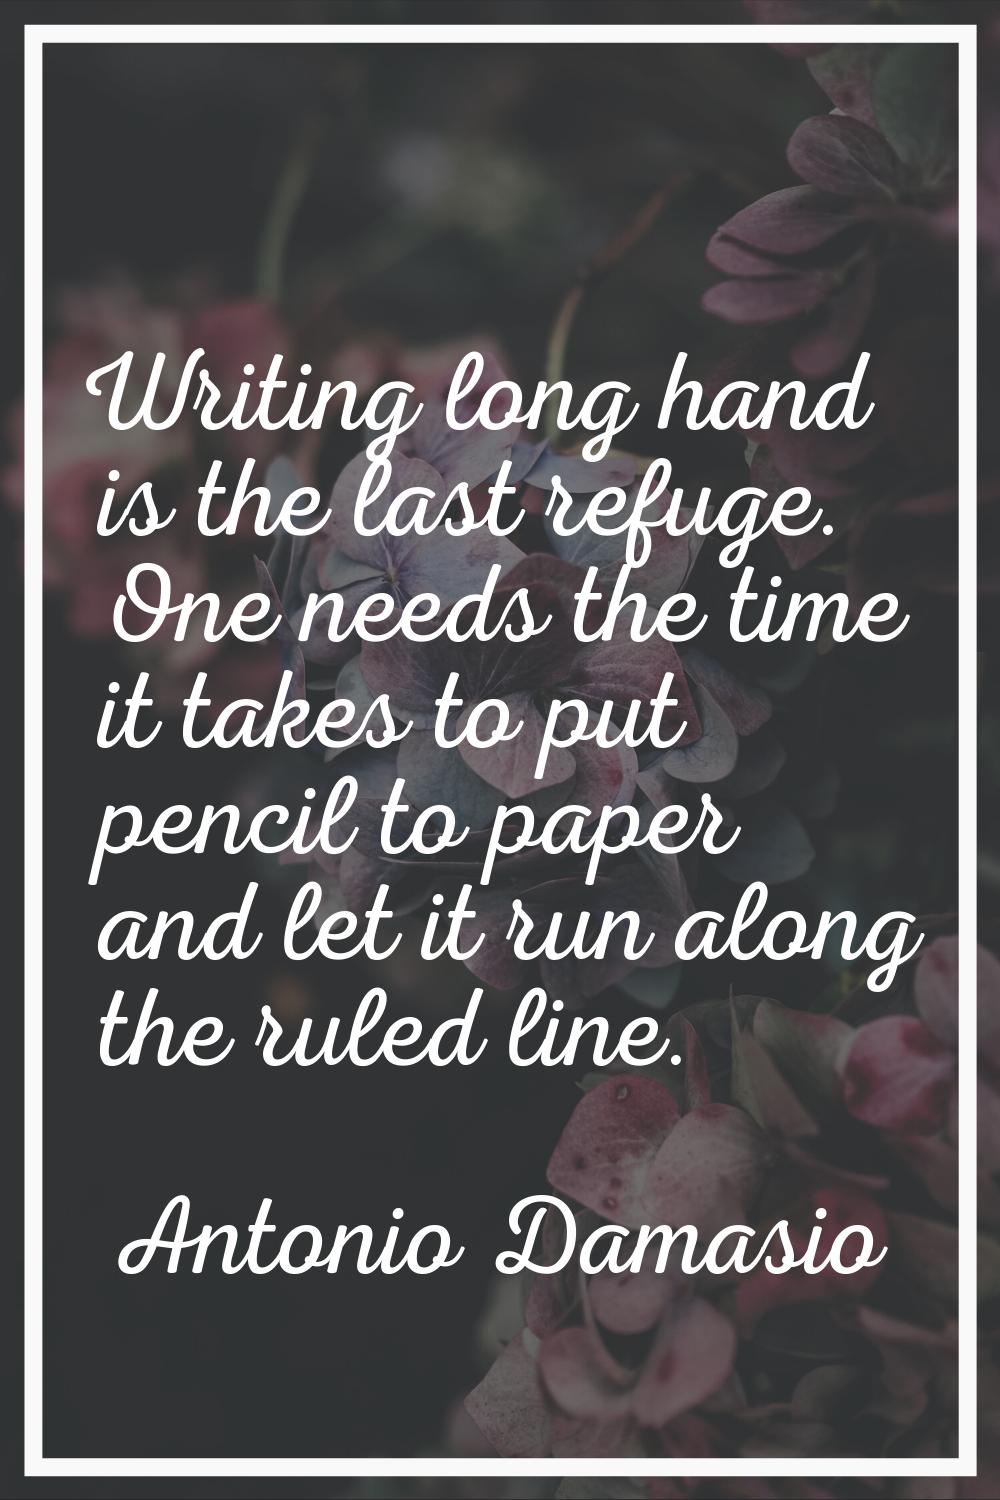 Writing long hand is the last refuge. One needs the time it takes to put pencil to paper and let it